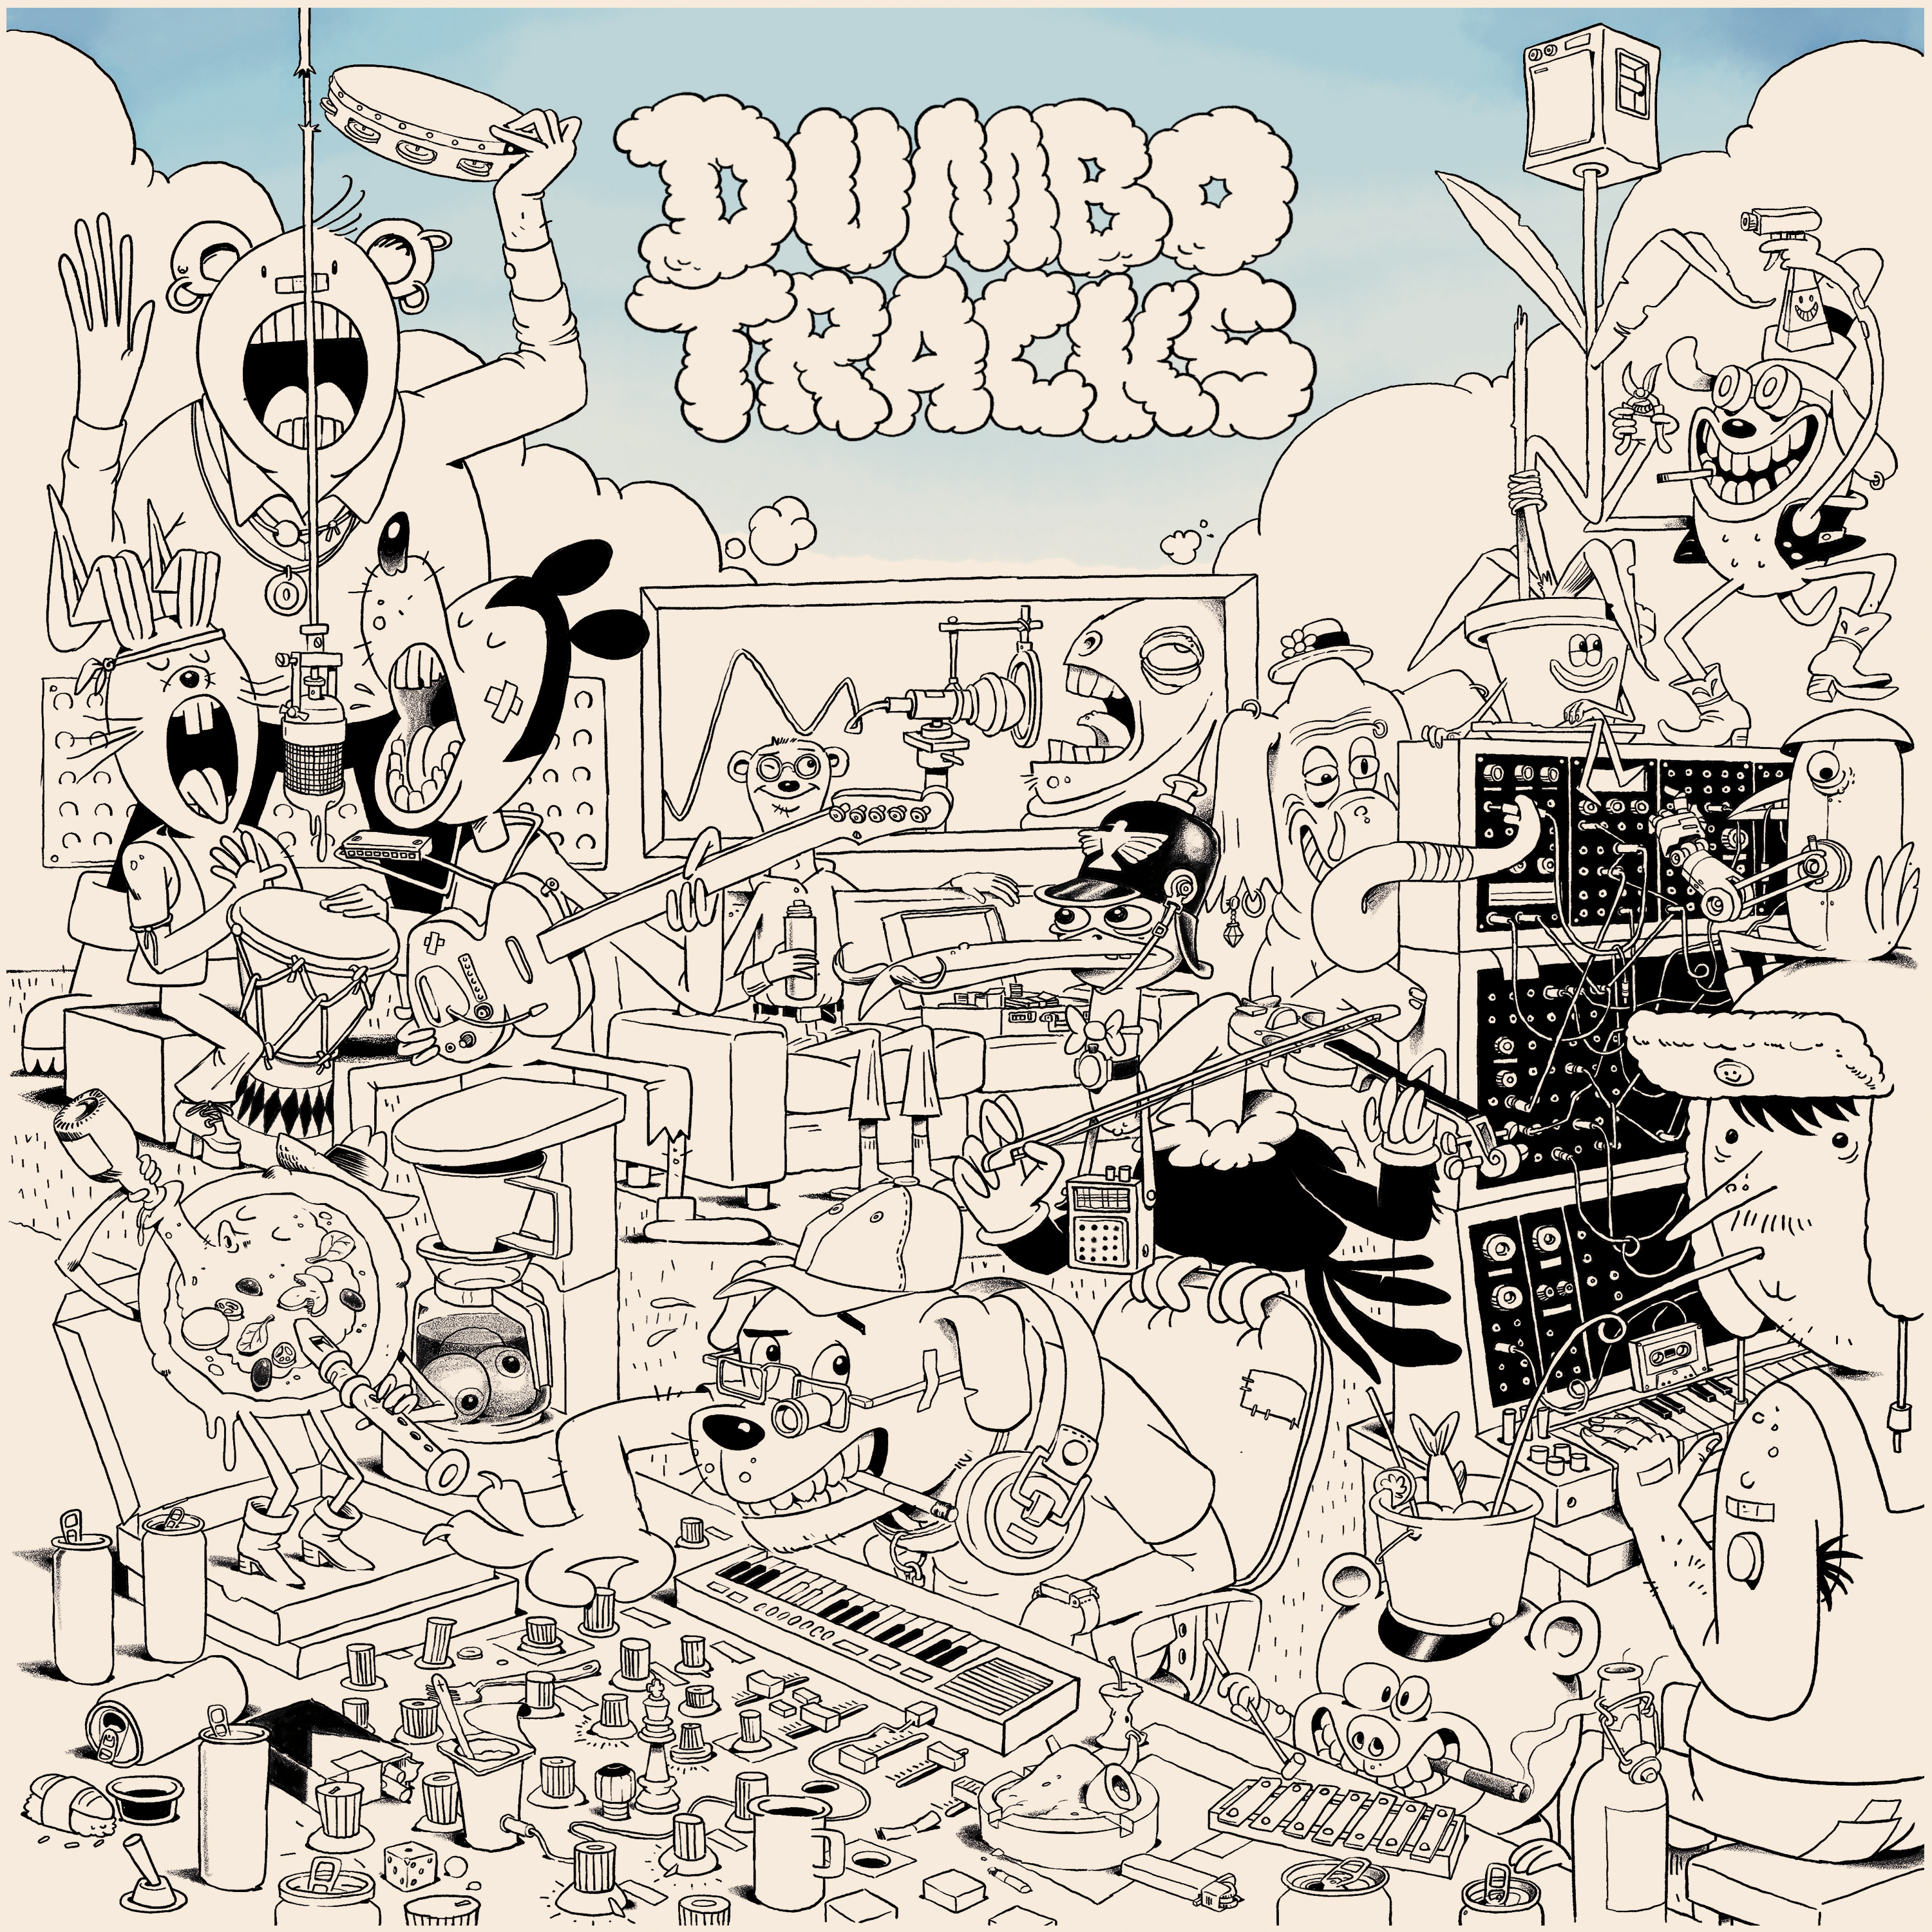 Dumbo Tracks - Move With Intention